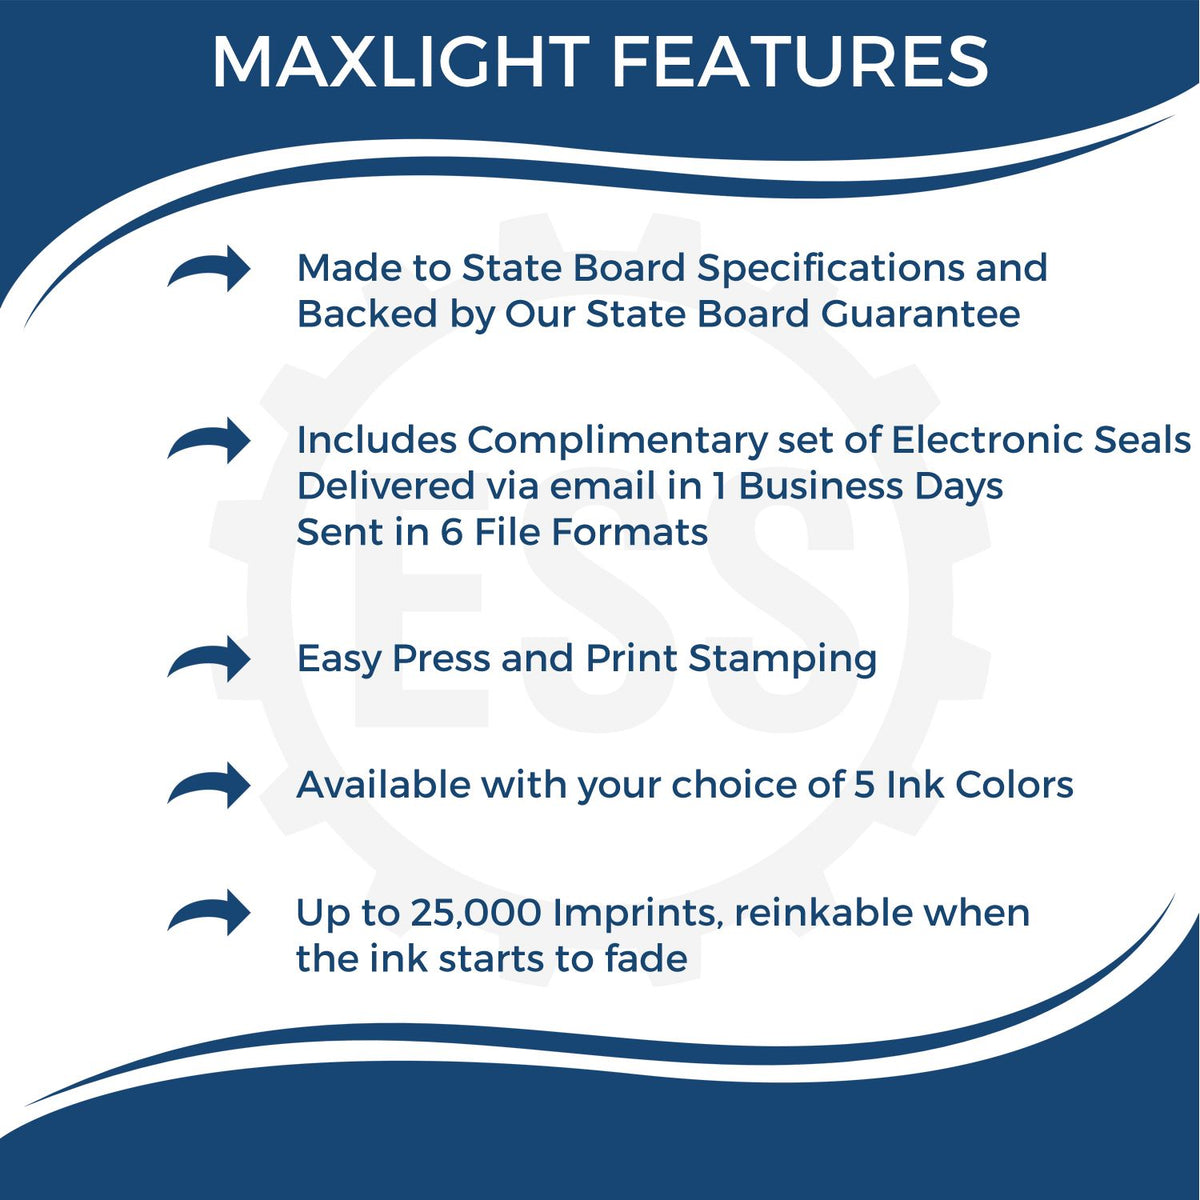 A picture of an infographic highlighting the selling points for the MaxLight Premium Pre-Inked Illinois Rectangular Notarial Stamp